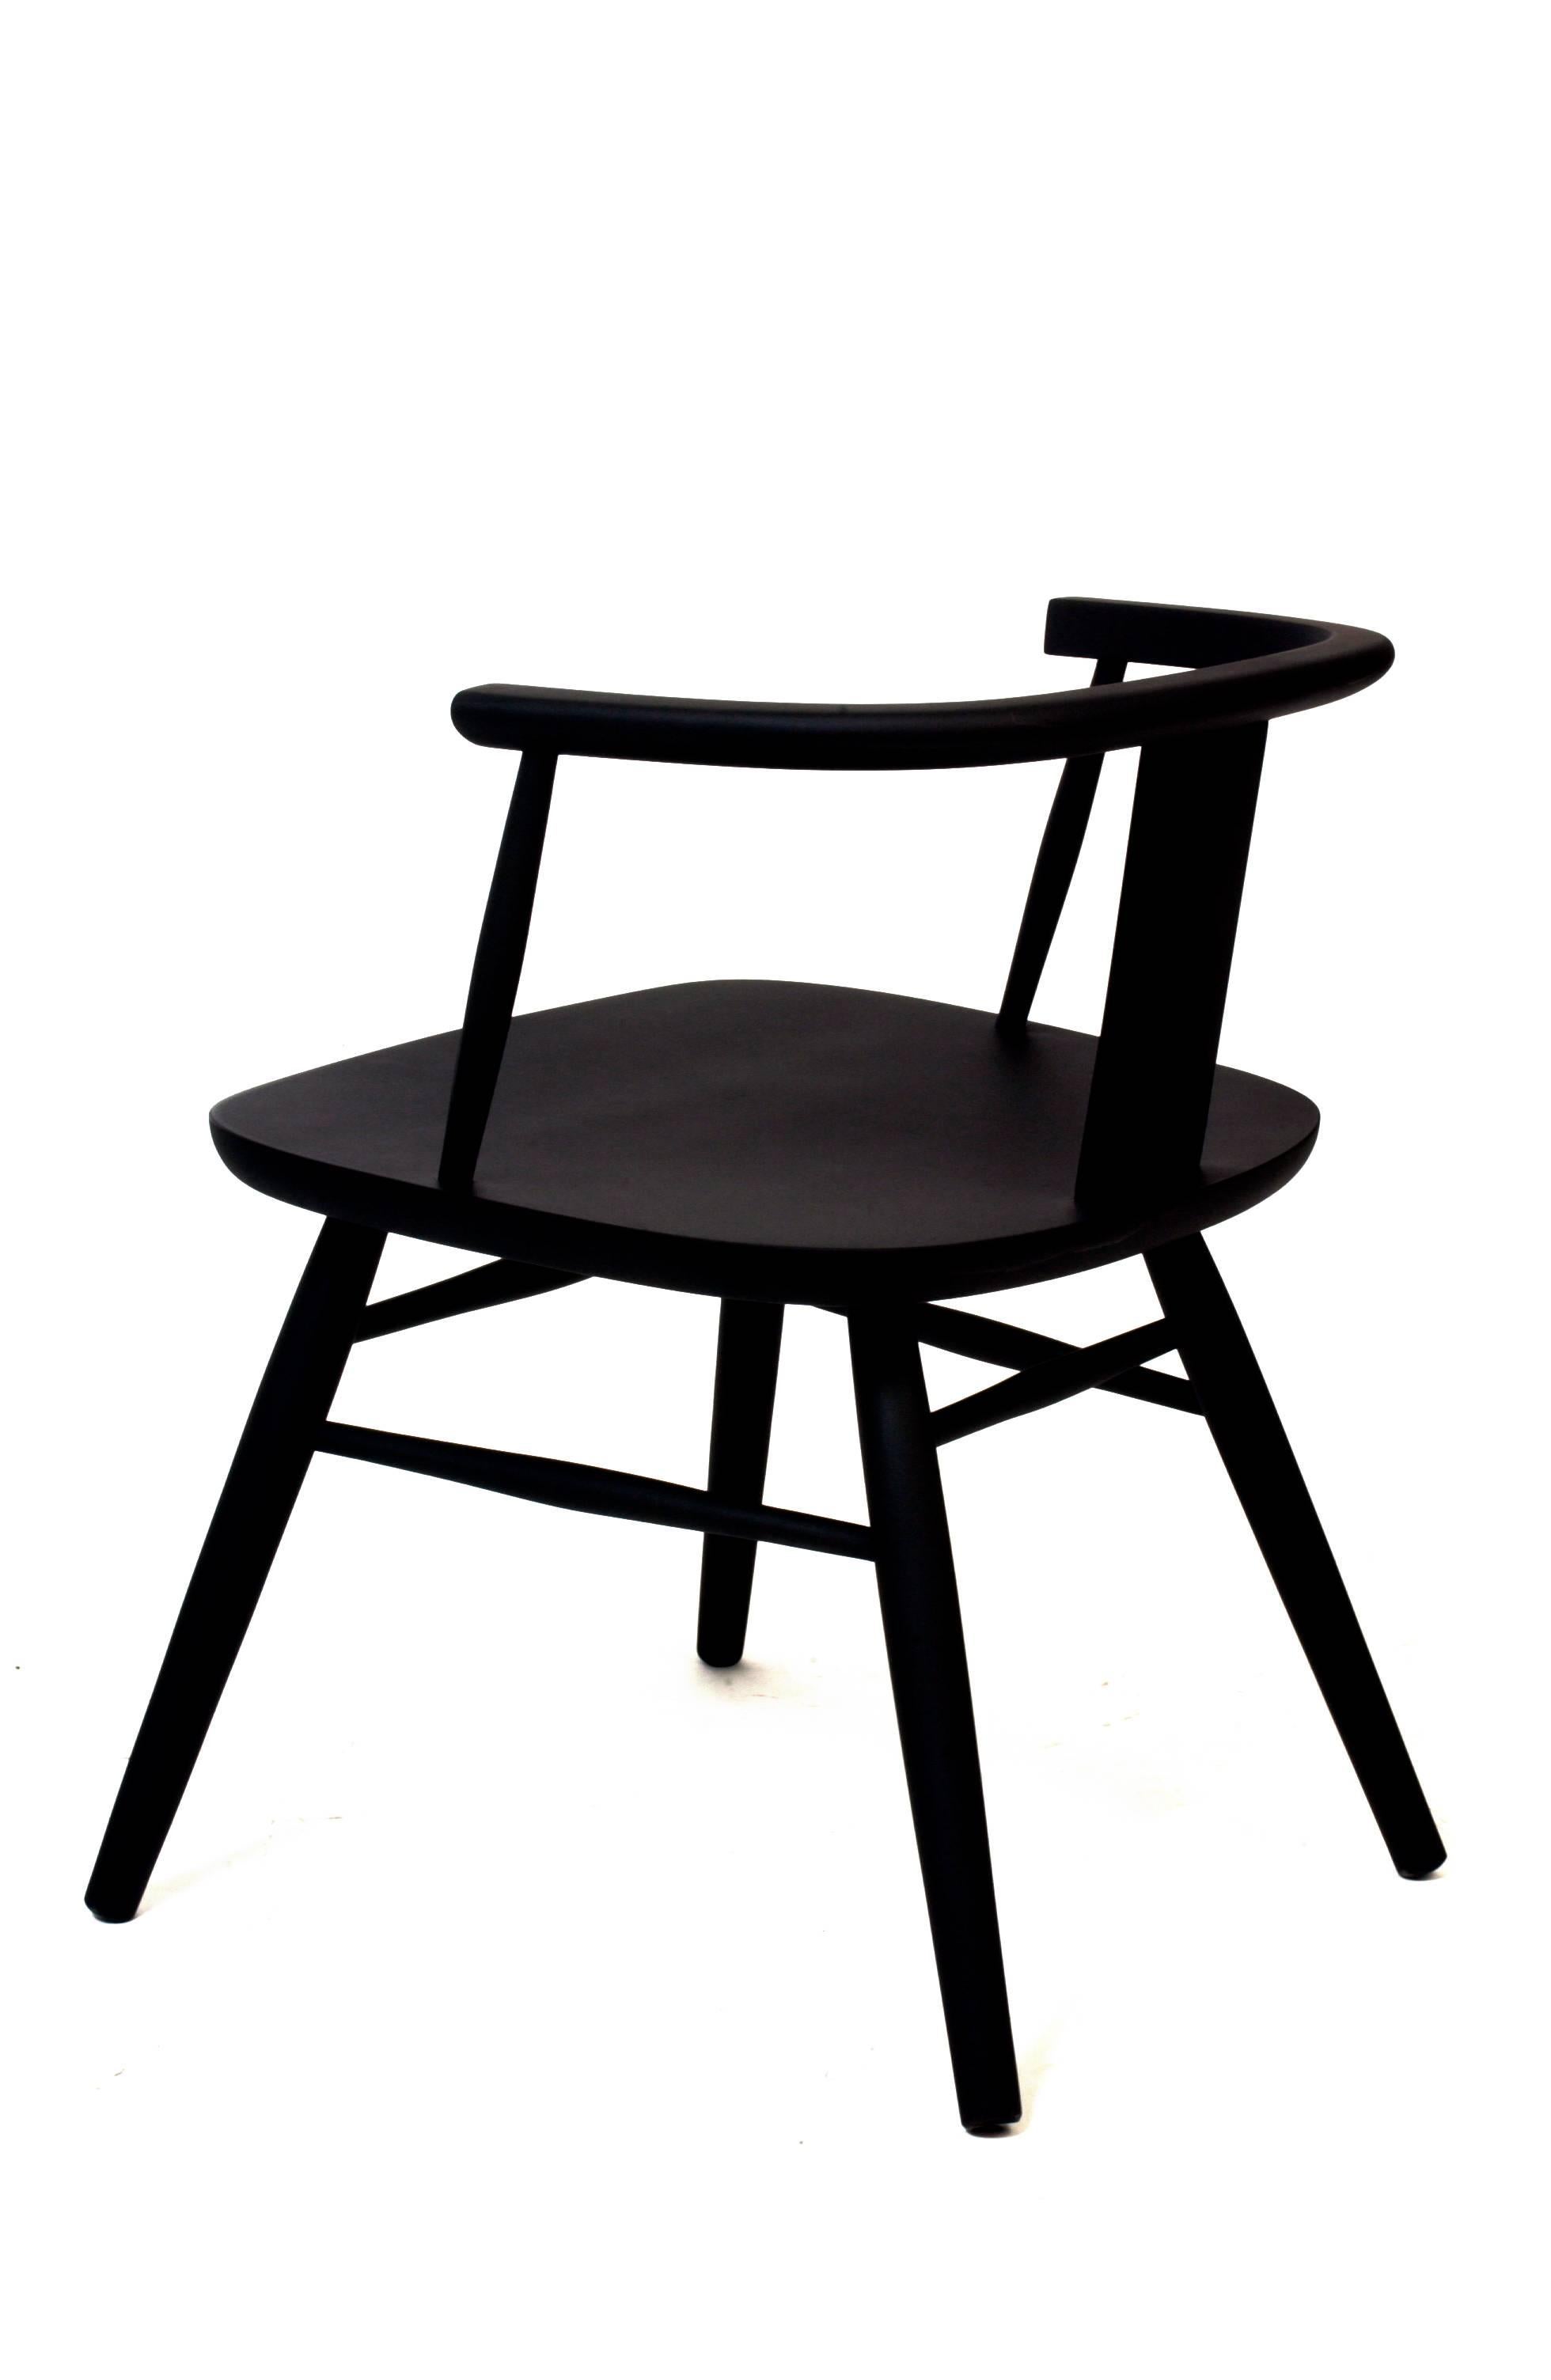 Modern Minimal Maun Windsor Dining Chair Handcrafted in Africa by Mabeo Furniture For Sale